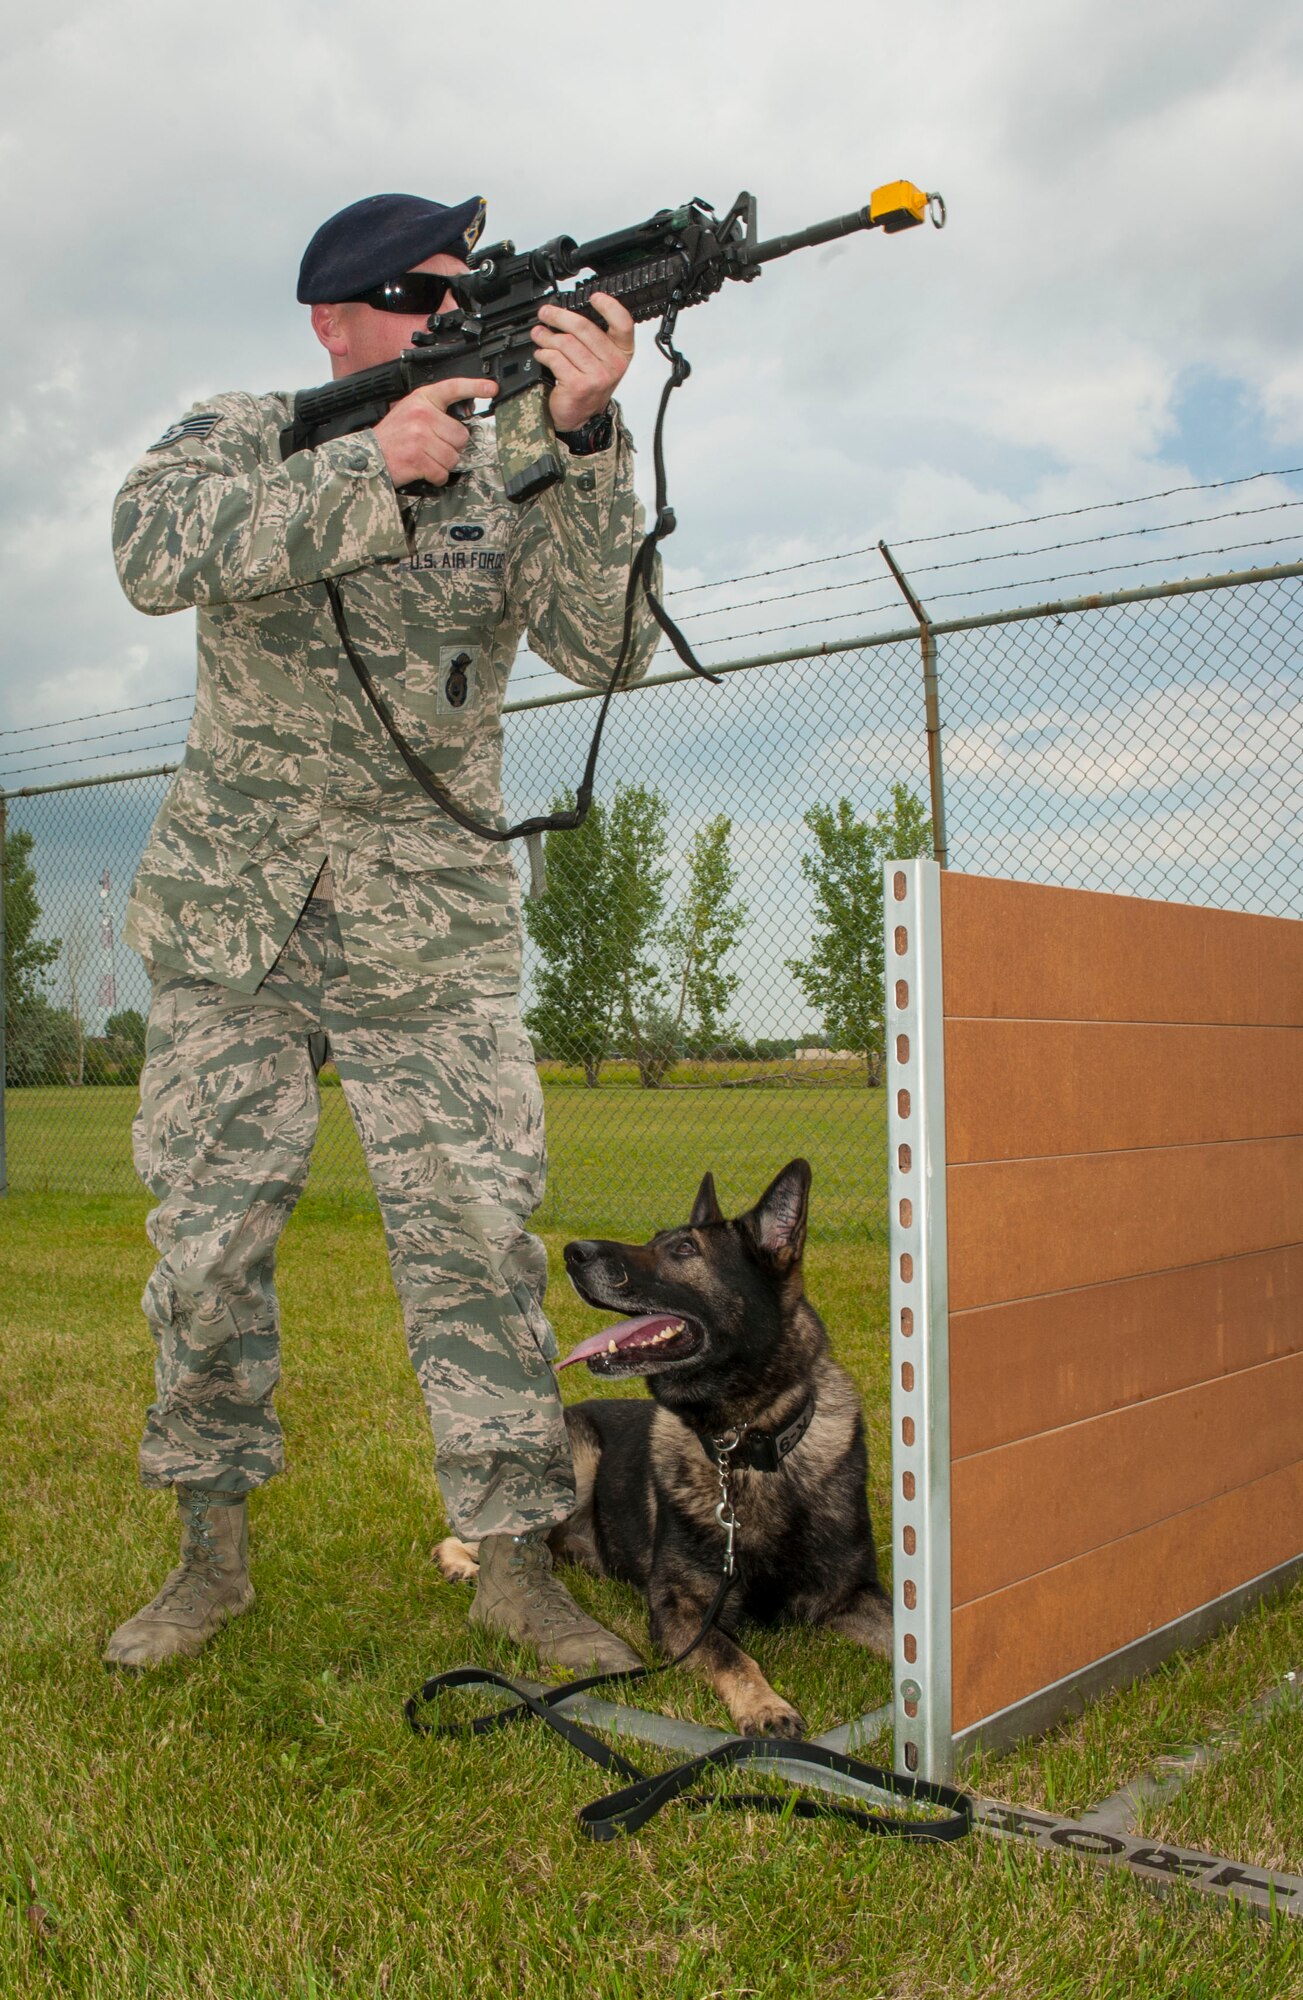 Staff Sgt. Tim Glover, 5th Security Forces Squadron military working dog handler, completes weapons training with his MWD Roko on Minot Air Force Base, N.D., July 28, 2014. During training, Glover used blank rounds to test Roko’s reaction to the sound of gunfire and his ability to obey commands in a stressful environment. (U.S. Air Force photo/Senior Airman Stephanie Morris)